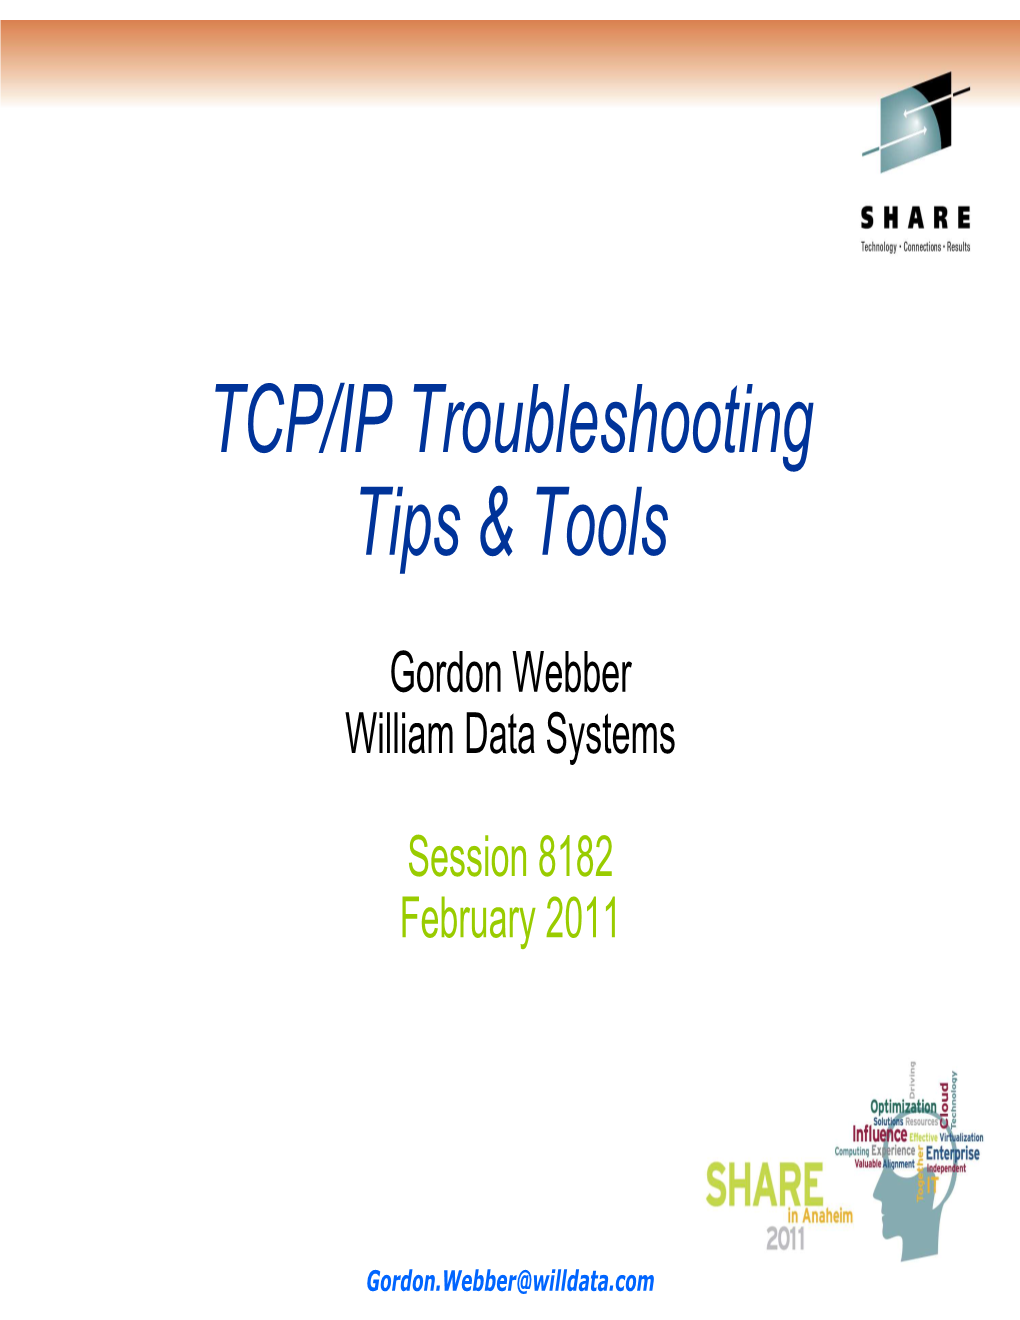 TCP/IP Troubleshooting Tips & Tools